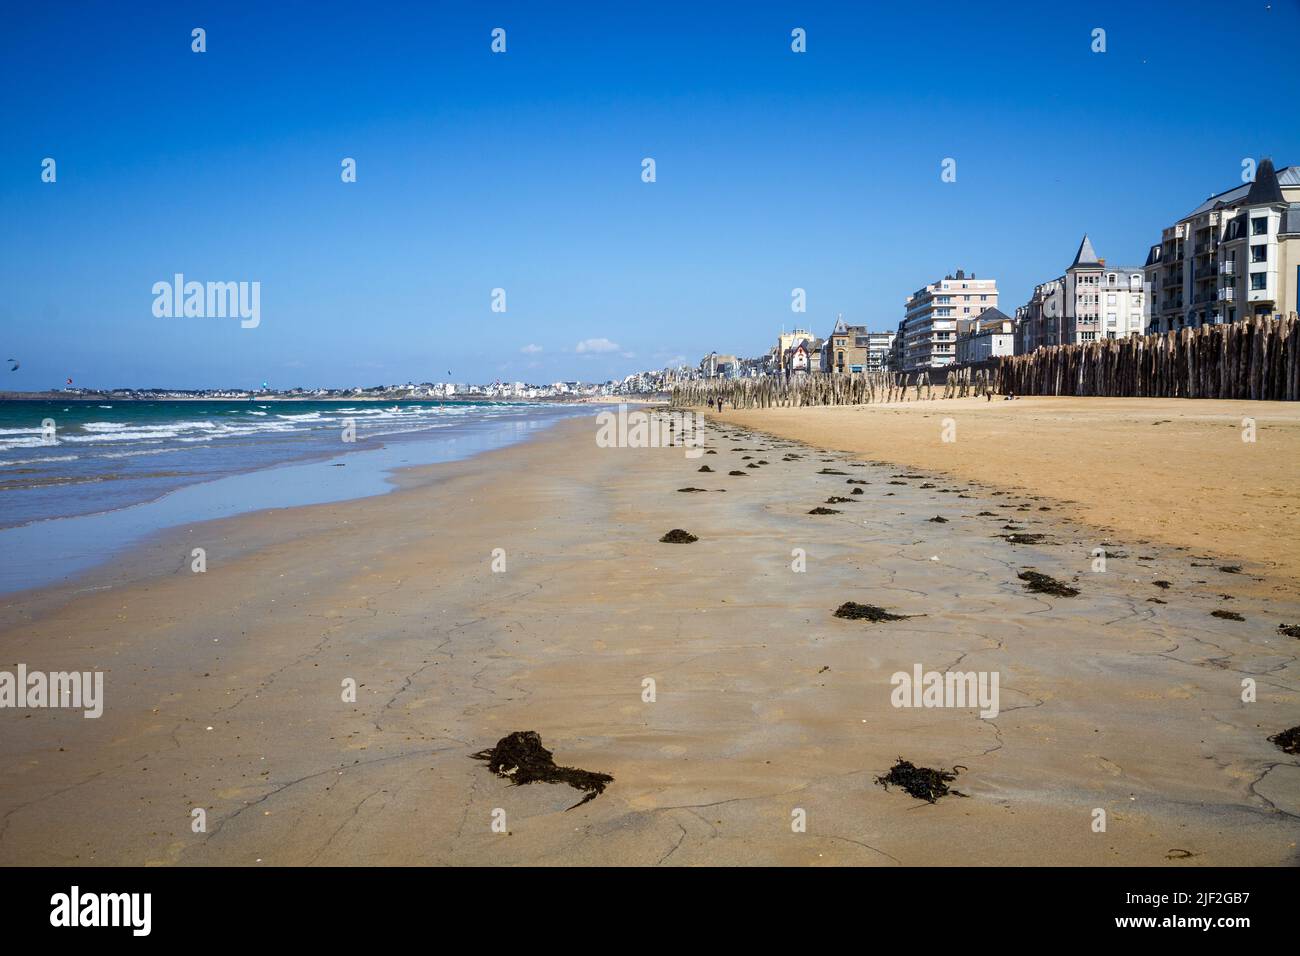 Saint-Malo beach and city in brittany, France Stock Photo